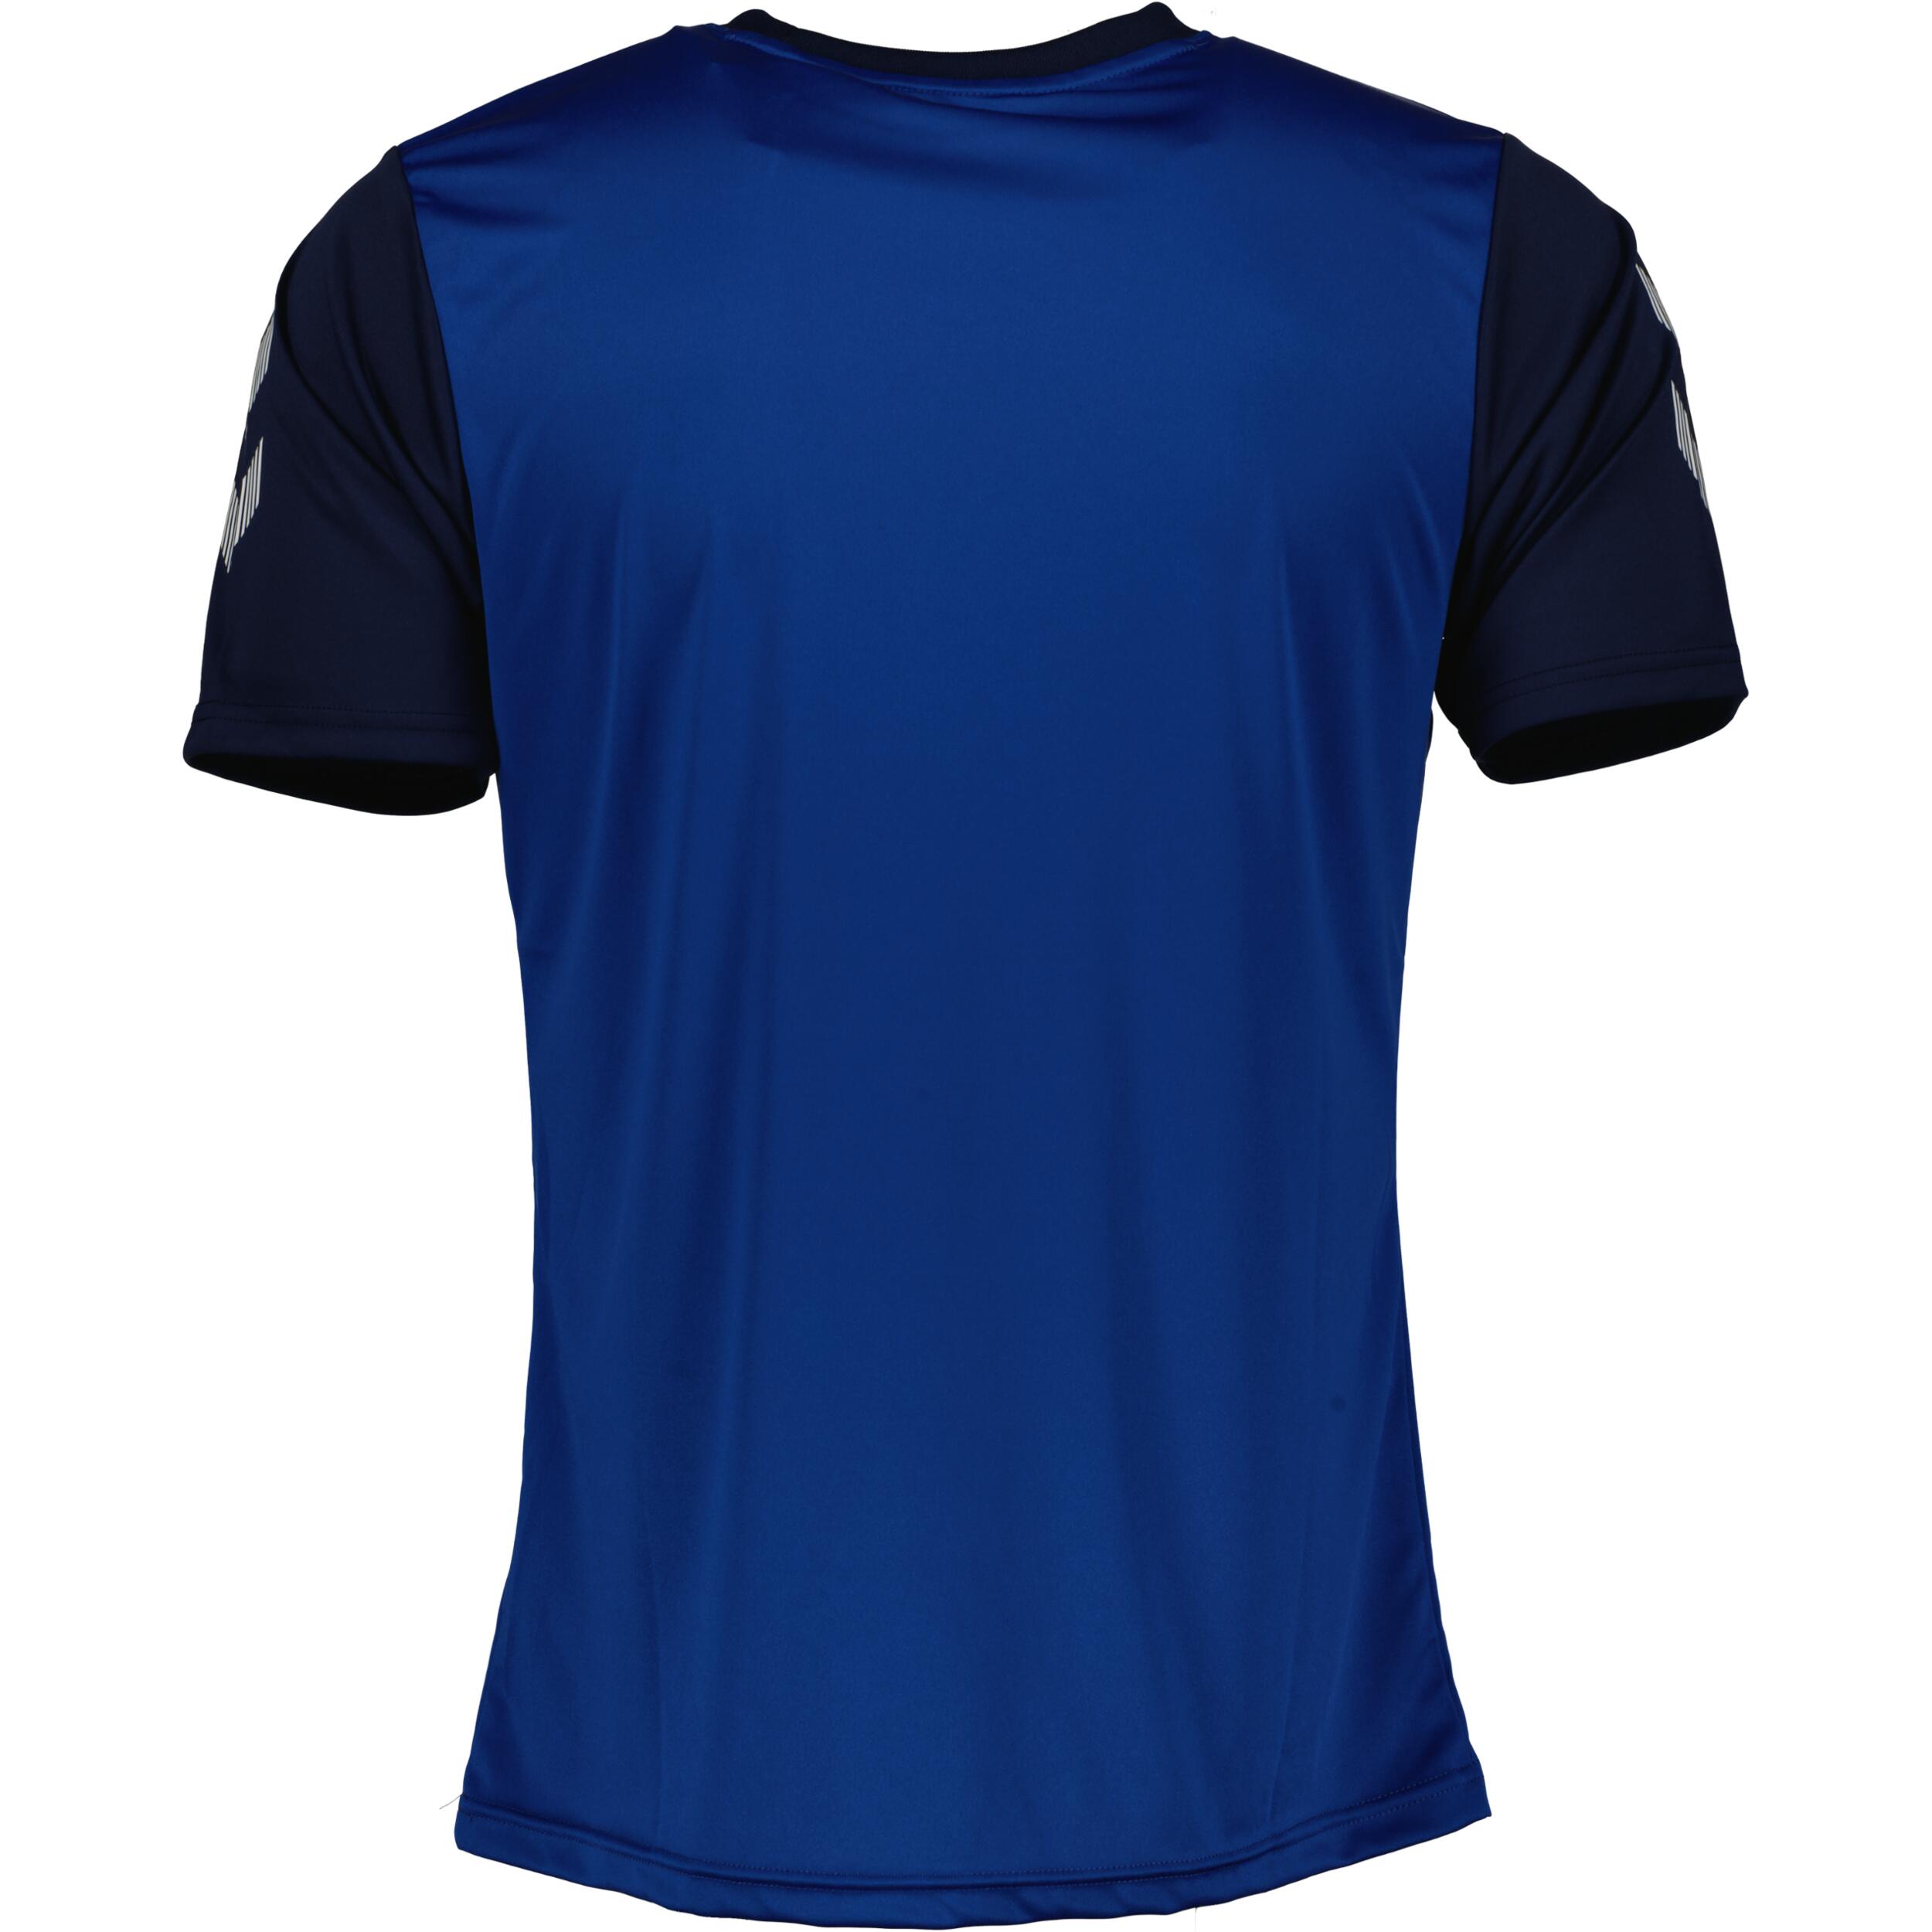 Match jersey for men, great for football, in blue/marine 2/3